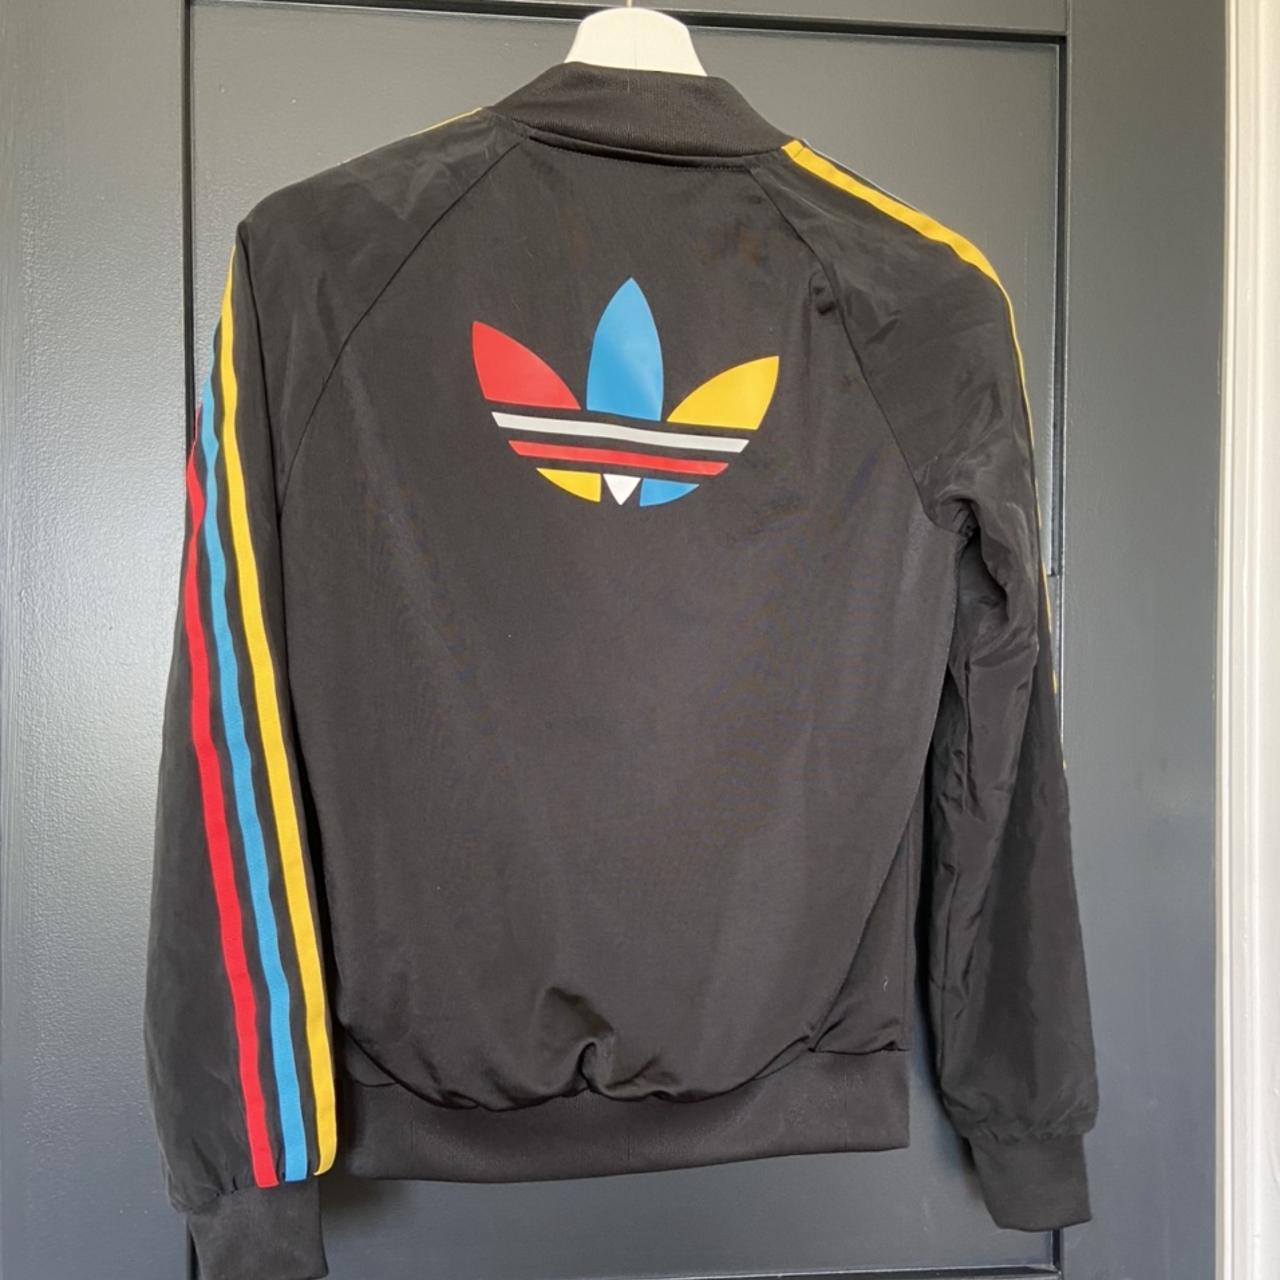 Vintage Adidas jacket. Absolutely love, great for... - Depop